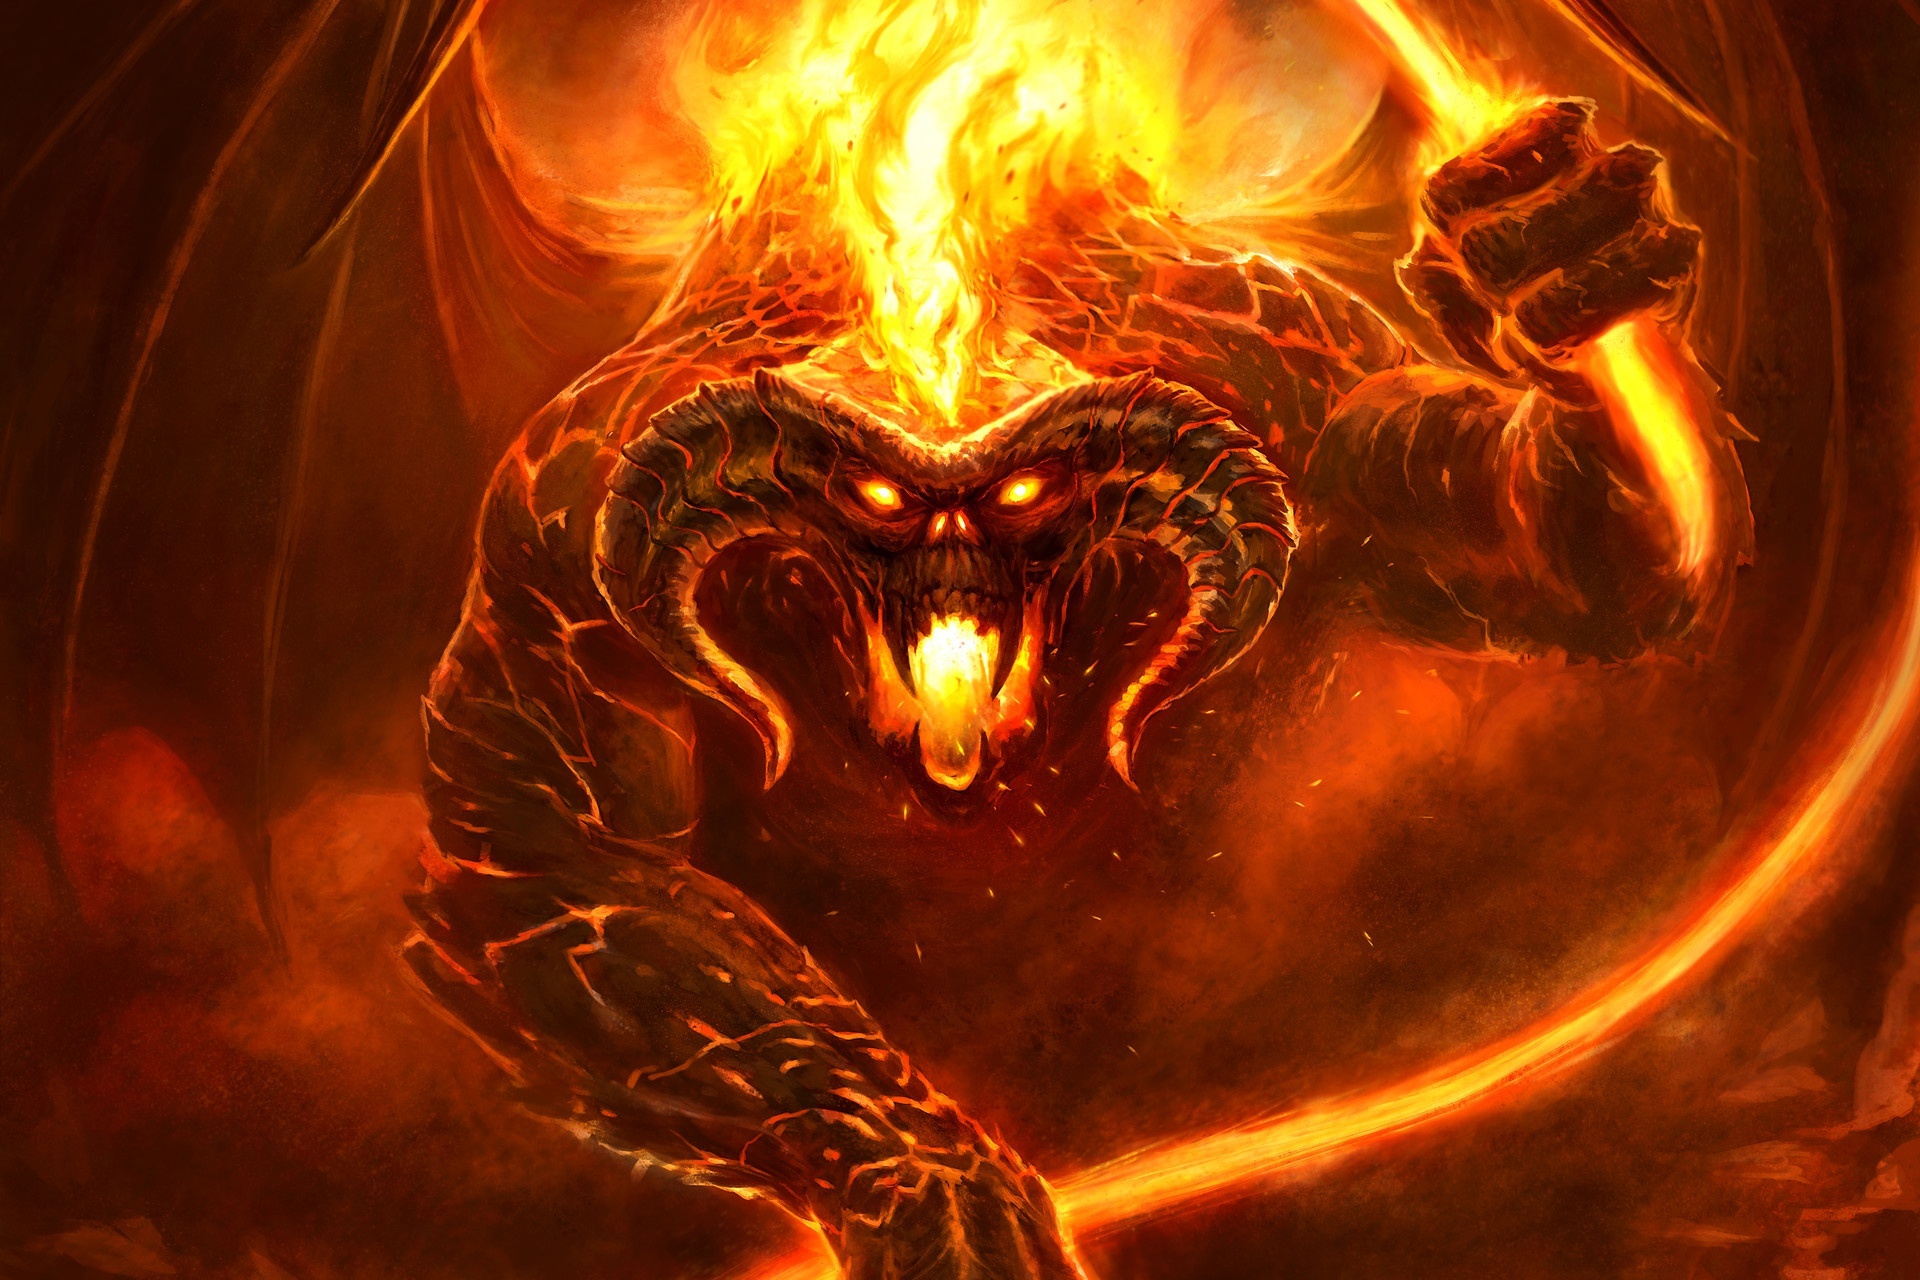 Balrog, Lord of the Rings, Breathtaking visuals, Epic wallpapers, 1920x1280 HD Desktop